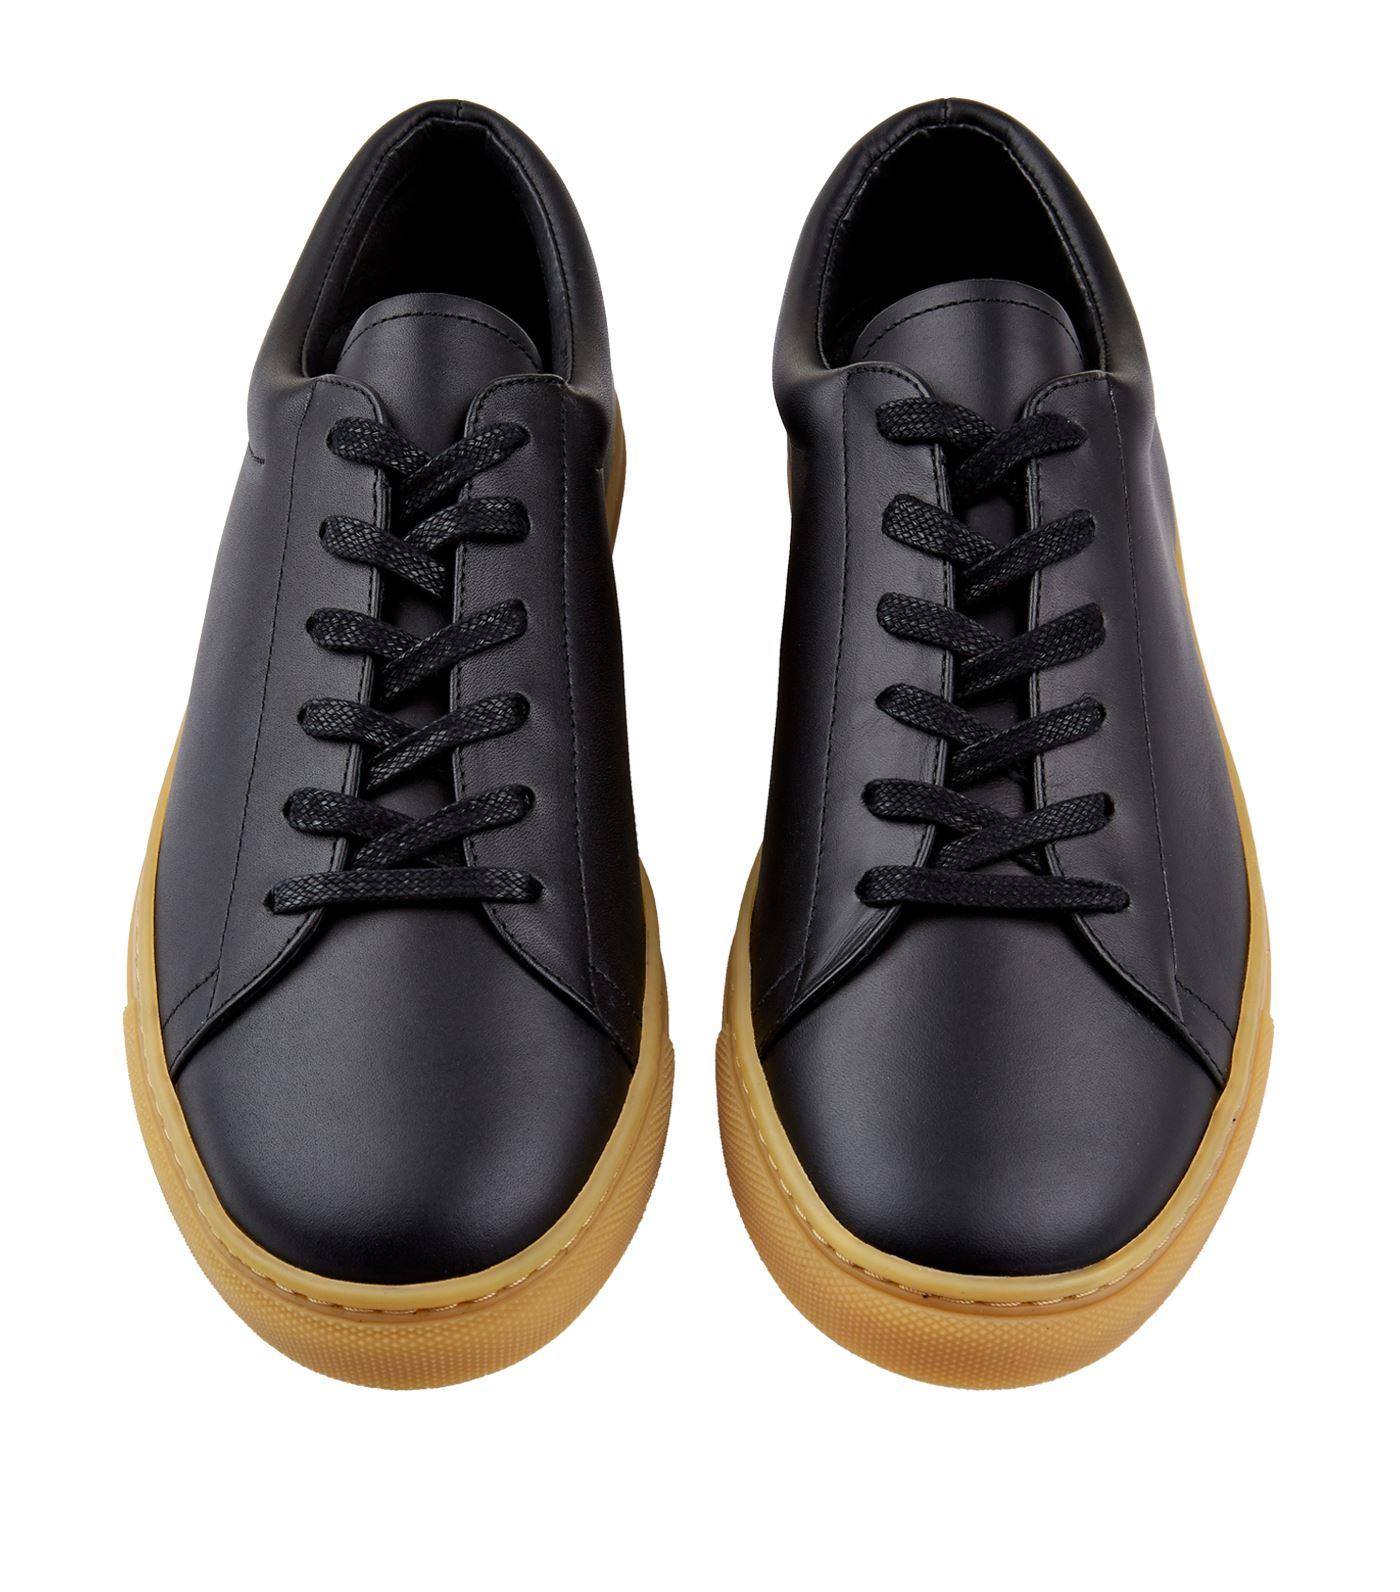 Lyst - Sandro Leather Sneakers in Black for Men